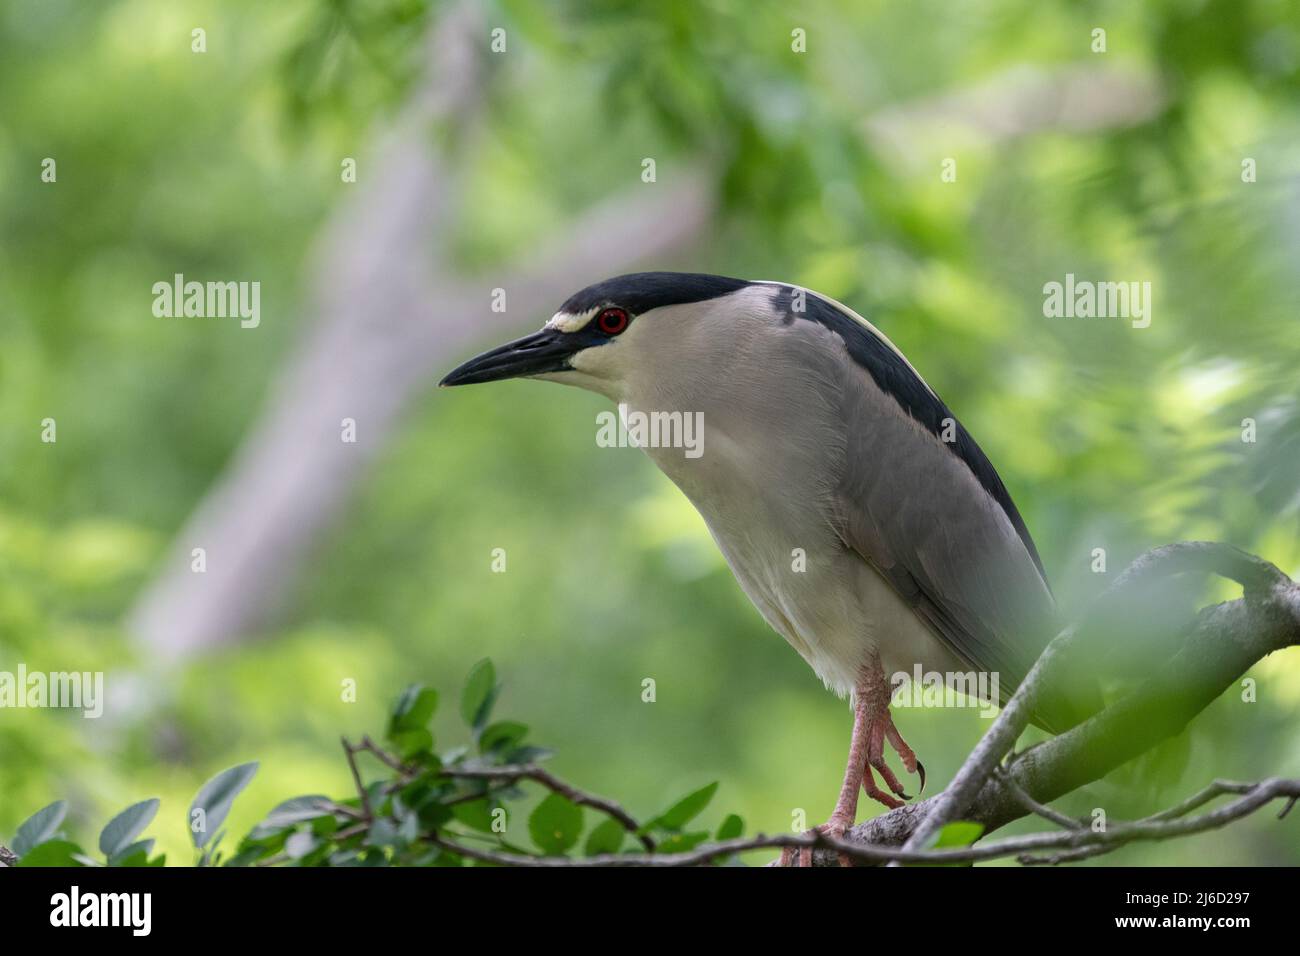 Profile of a Black-crowned Night Heron perched on a tree branch in the UTSWMC Rookery in Dallas, Texas on a sunny morning. Stock Photo